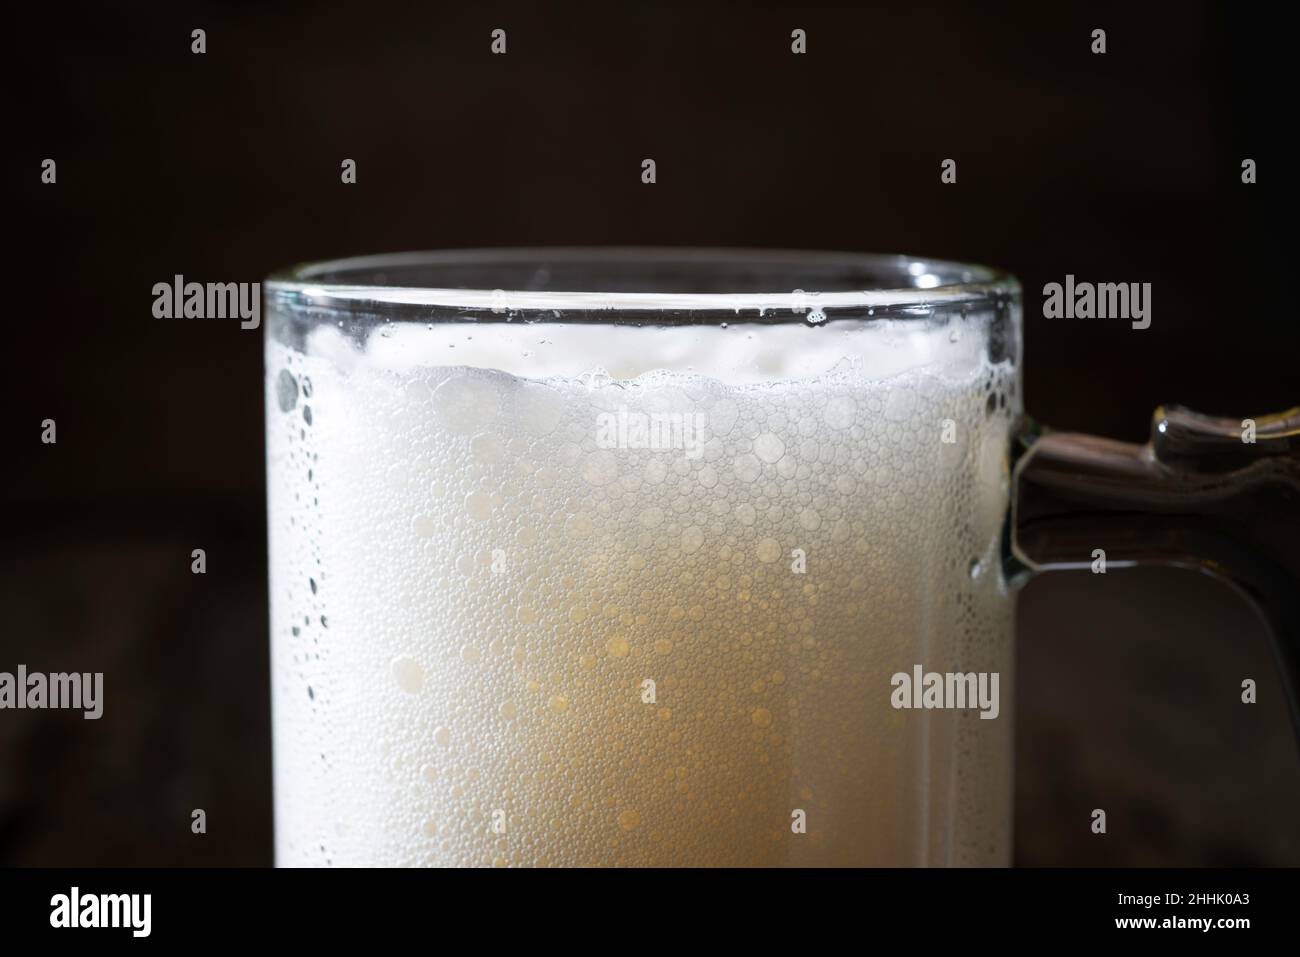 a mug of beer on a dark background Stock Photo